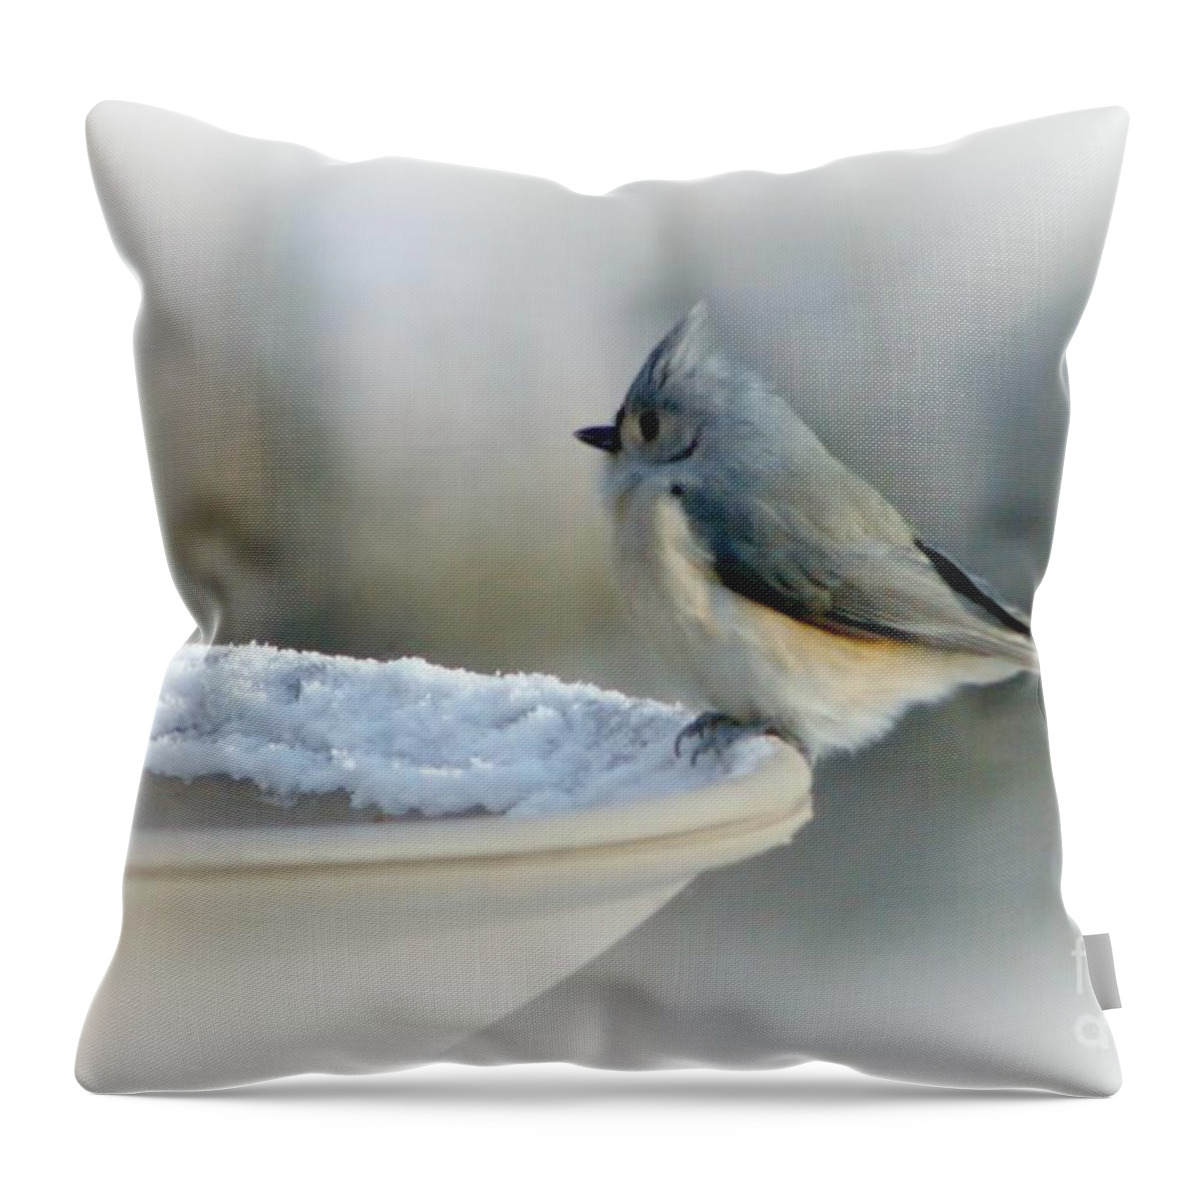 Winter Throw Pillow featuring the photograph Chilly Start by Barbara S Nickerson